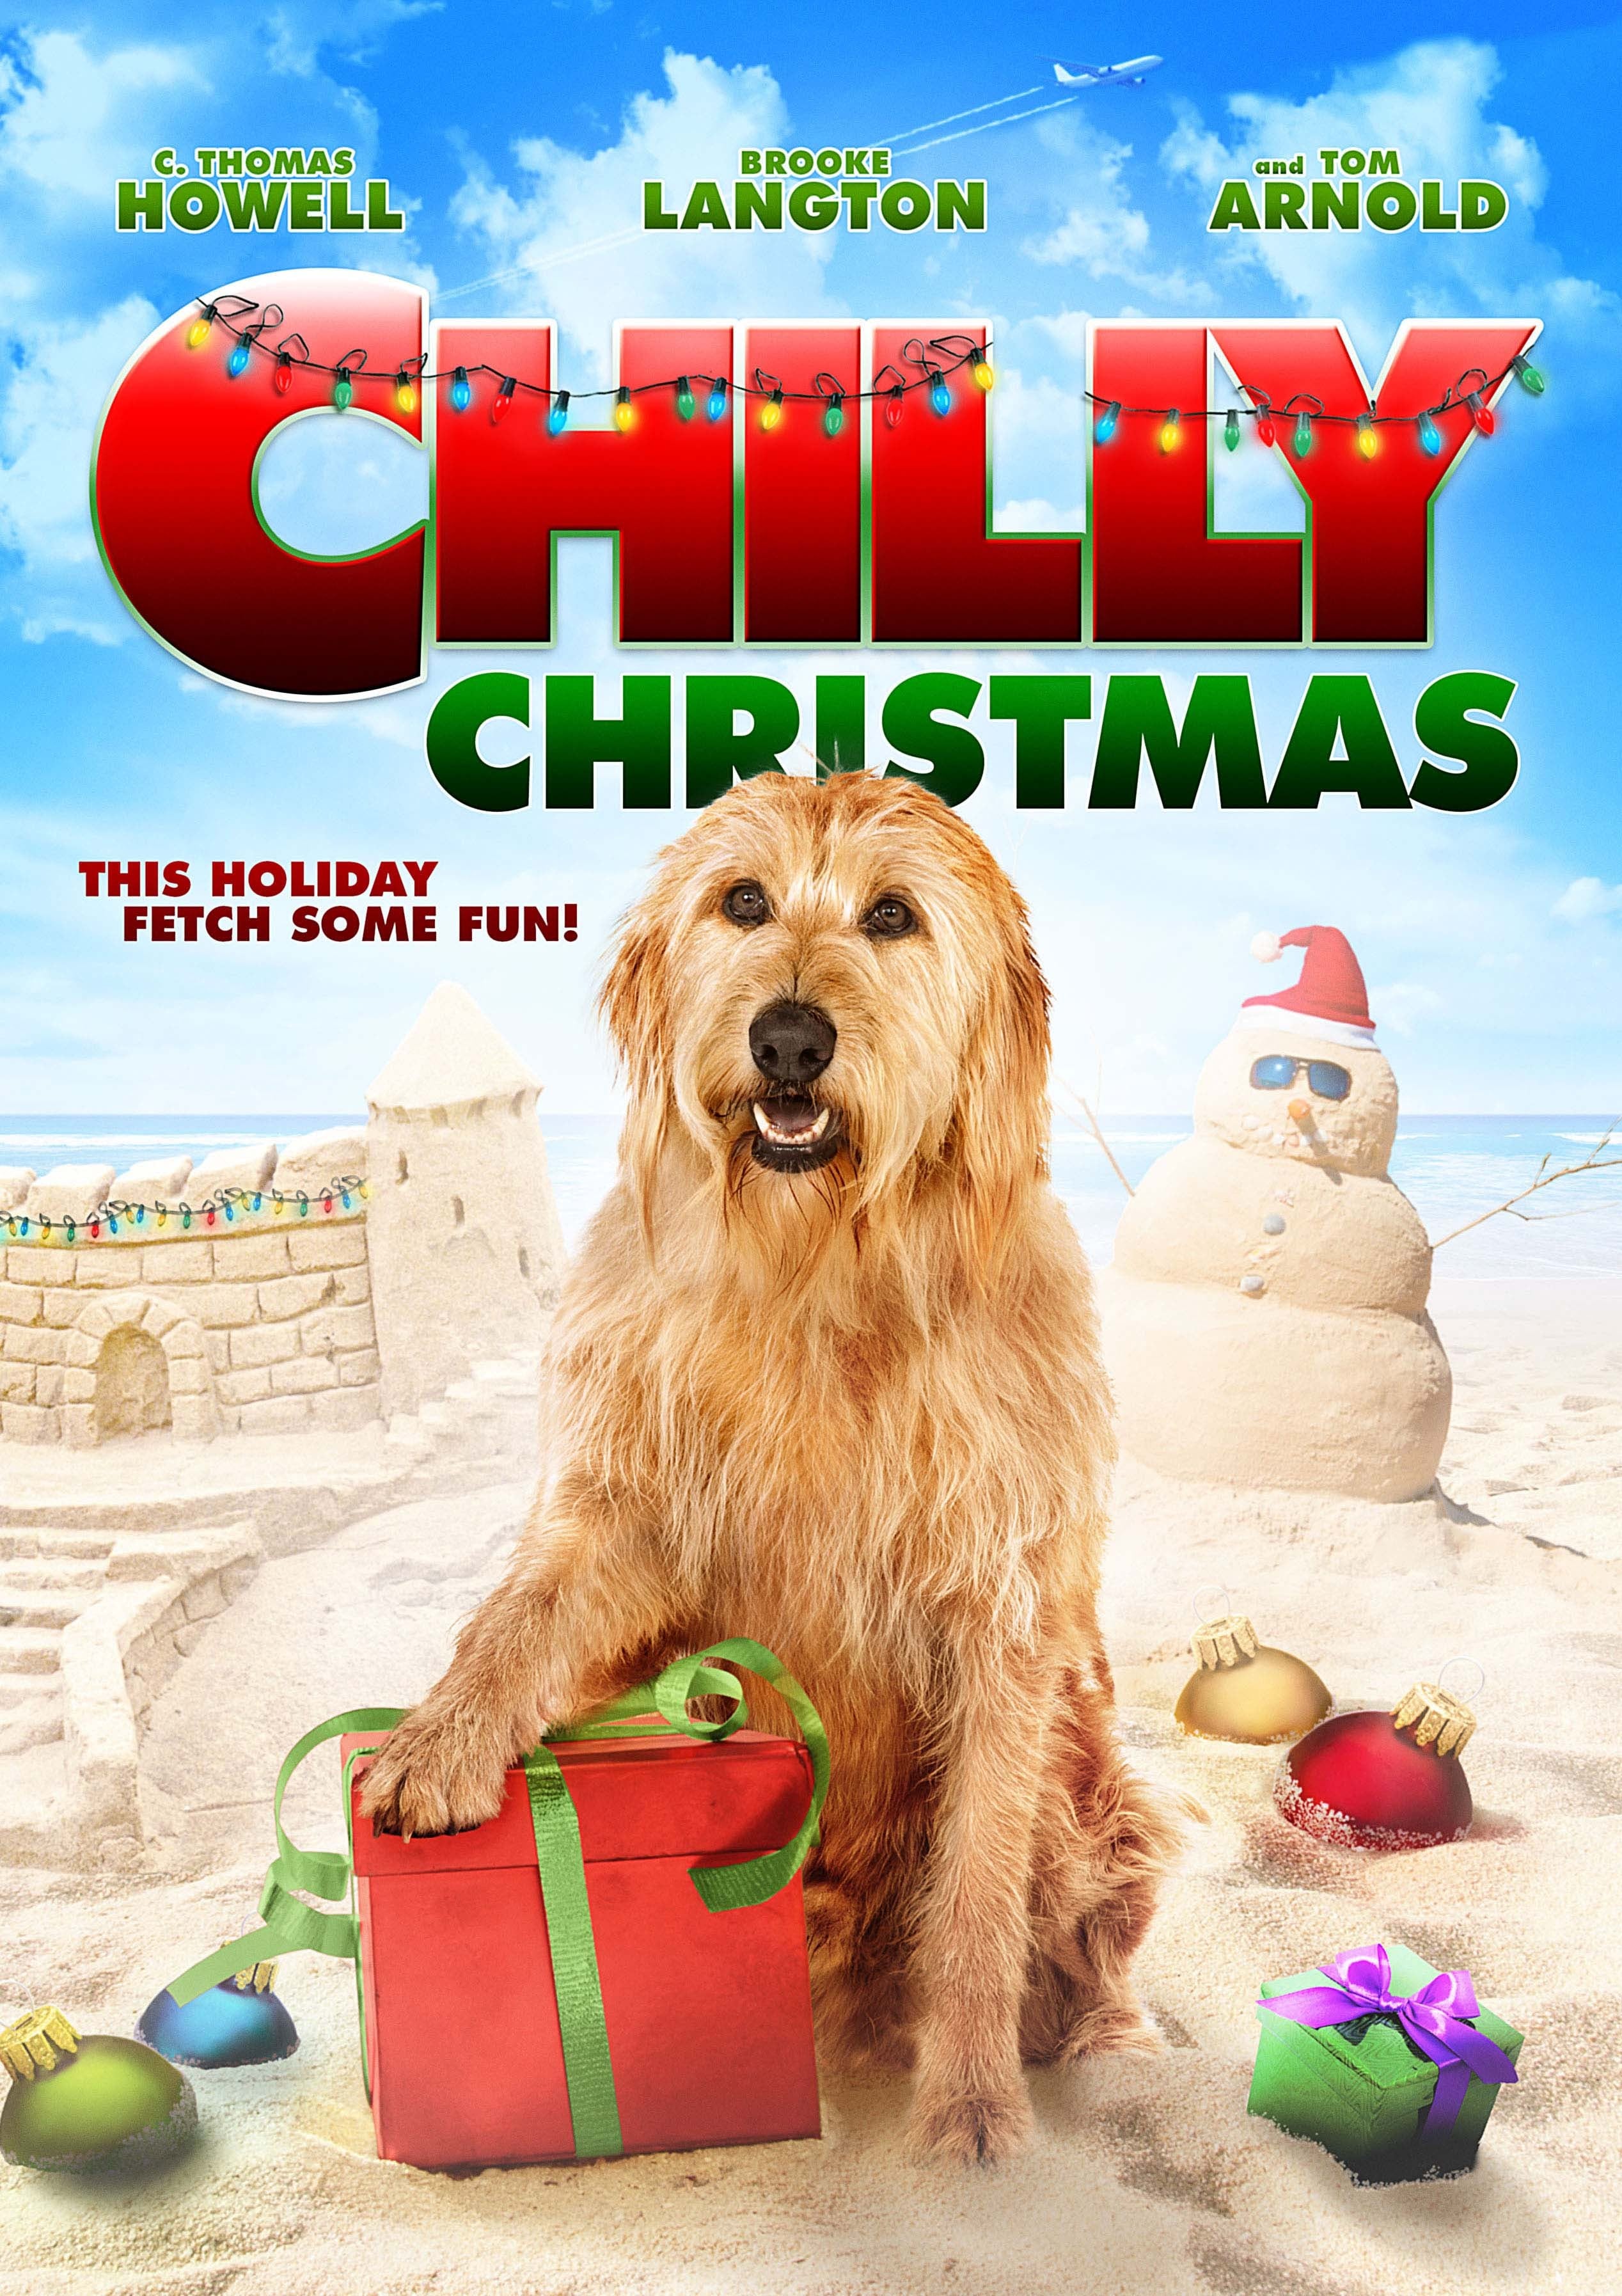 Poster for the movie "Chilly Christmas"